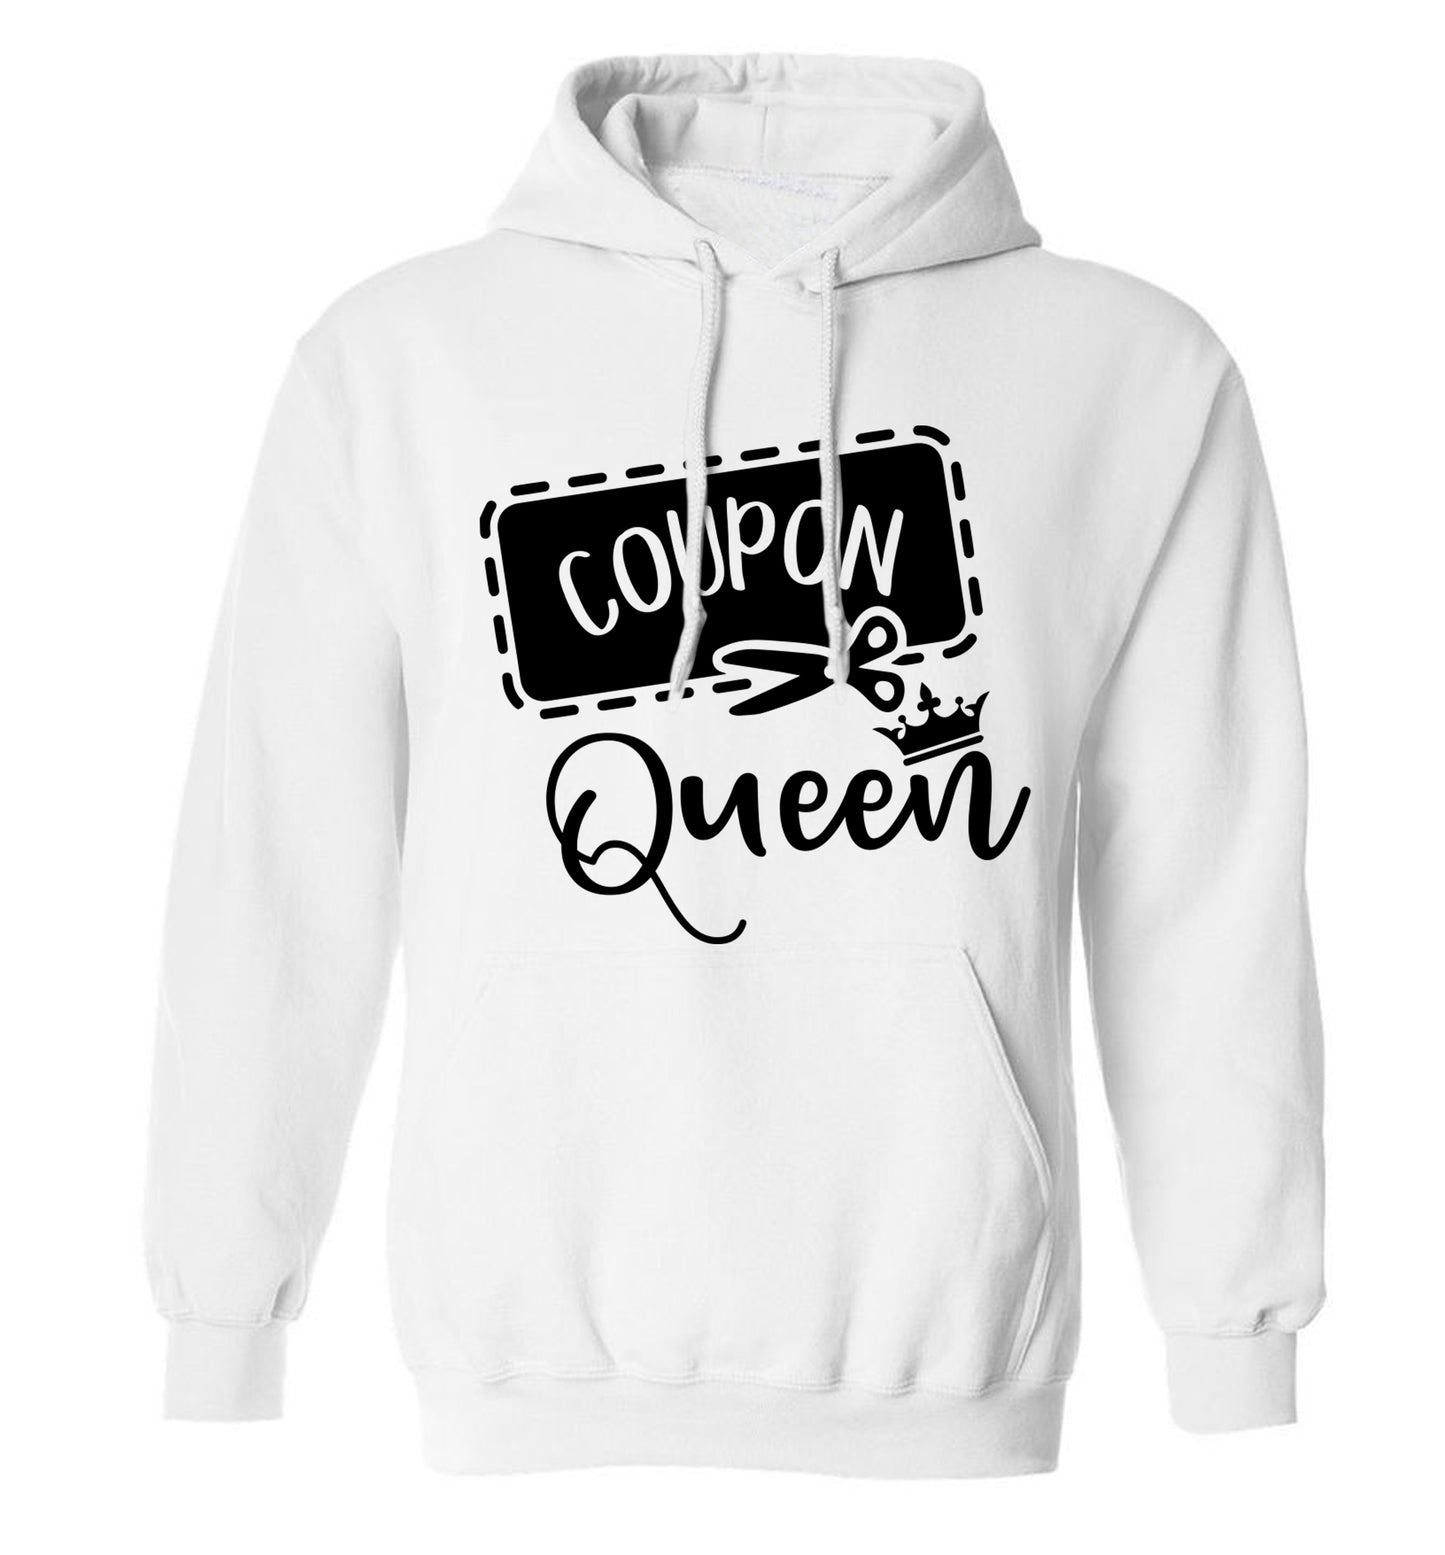 Coupon Queen adults unisex white hoodie 2XL